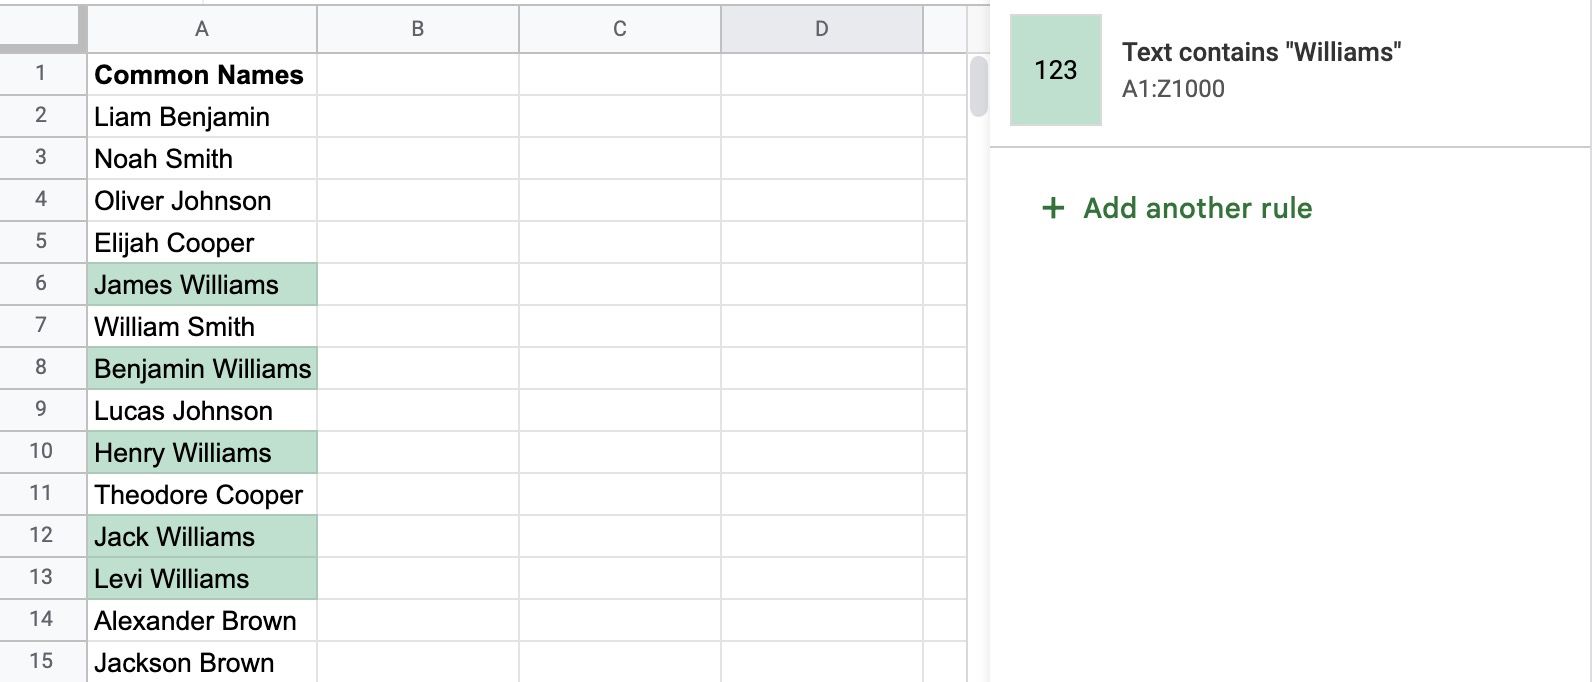 The result of conditional formatting in Google Sheets